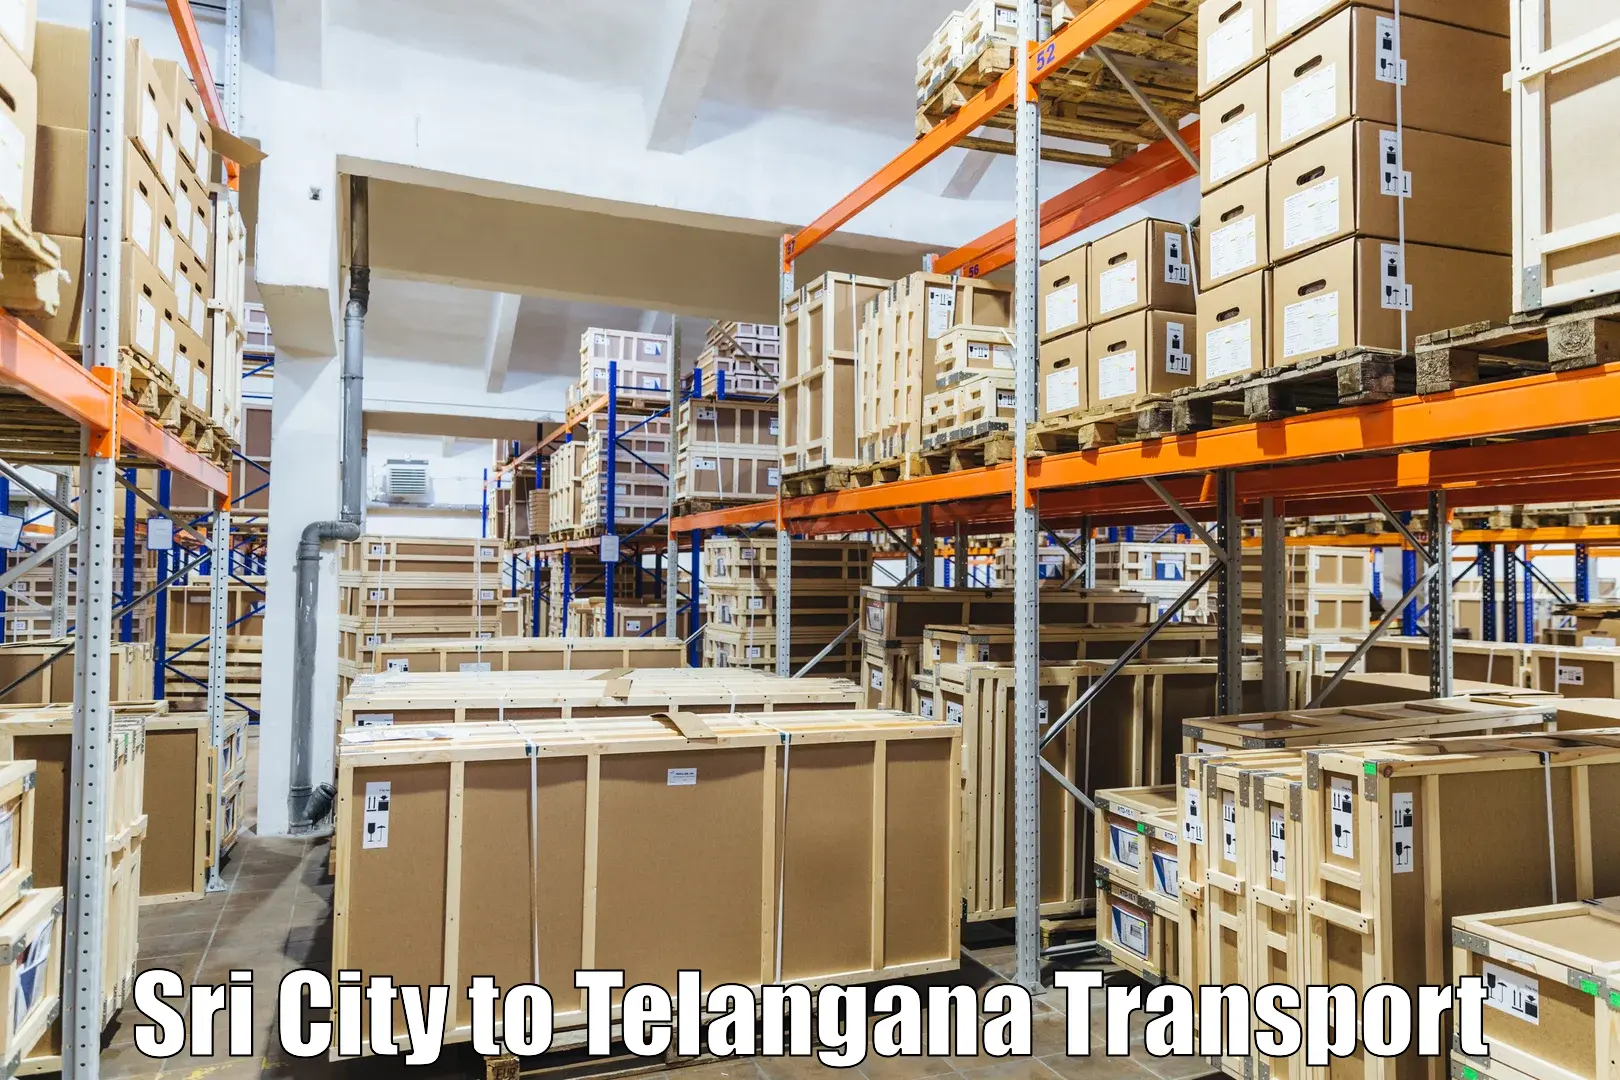 Truck transport companies in India Sri City to Asifabad